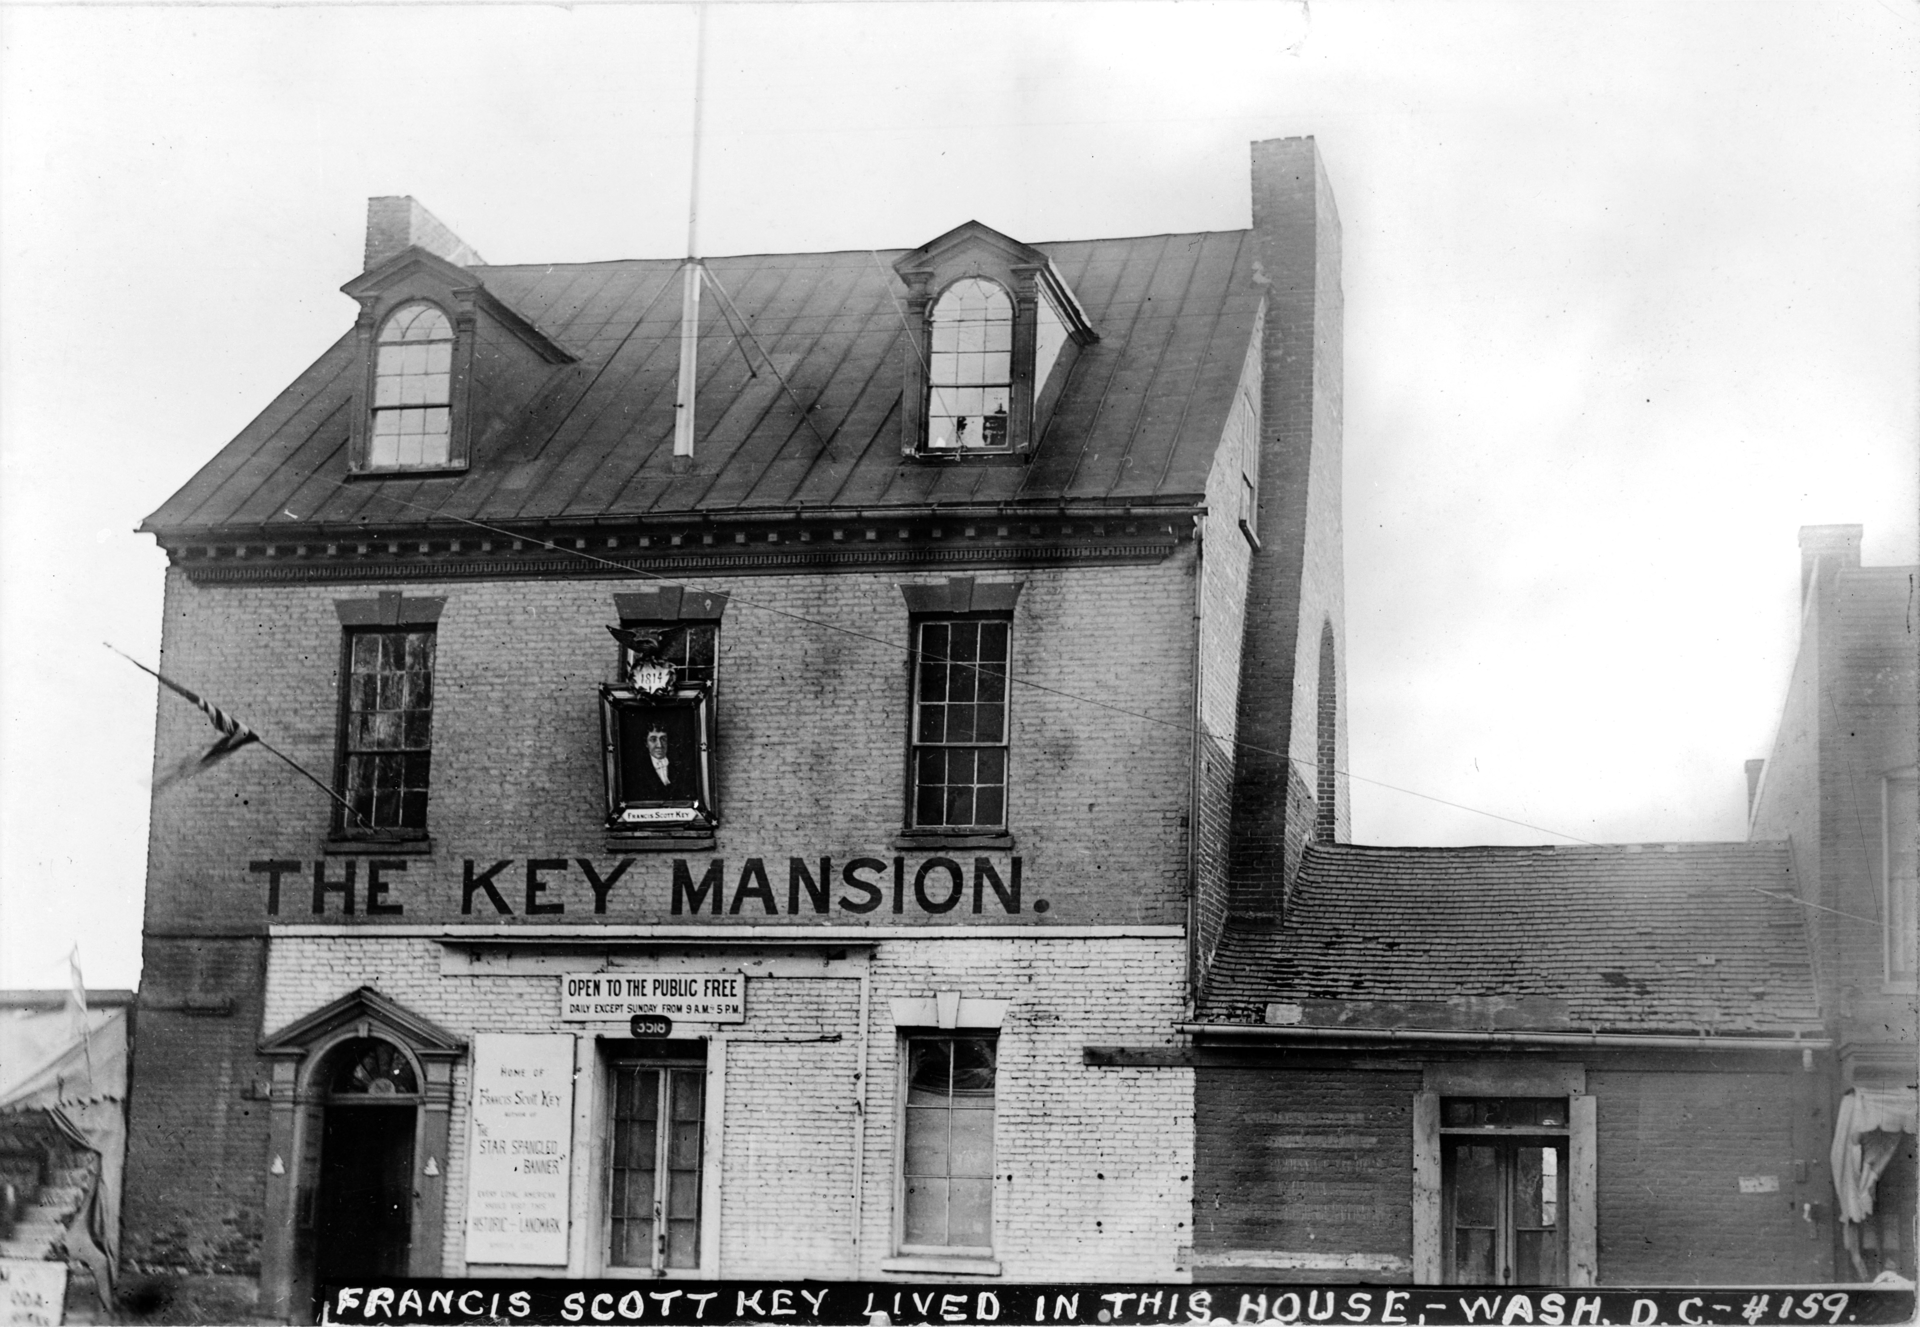 Francis Scott Key lived in this House located at what is now the foot of Key Bridge.